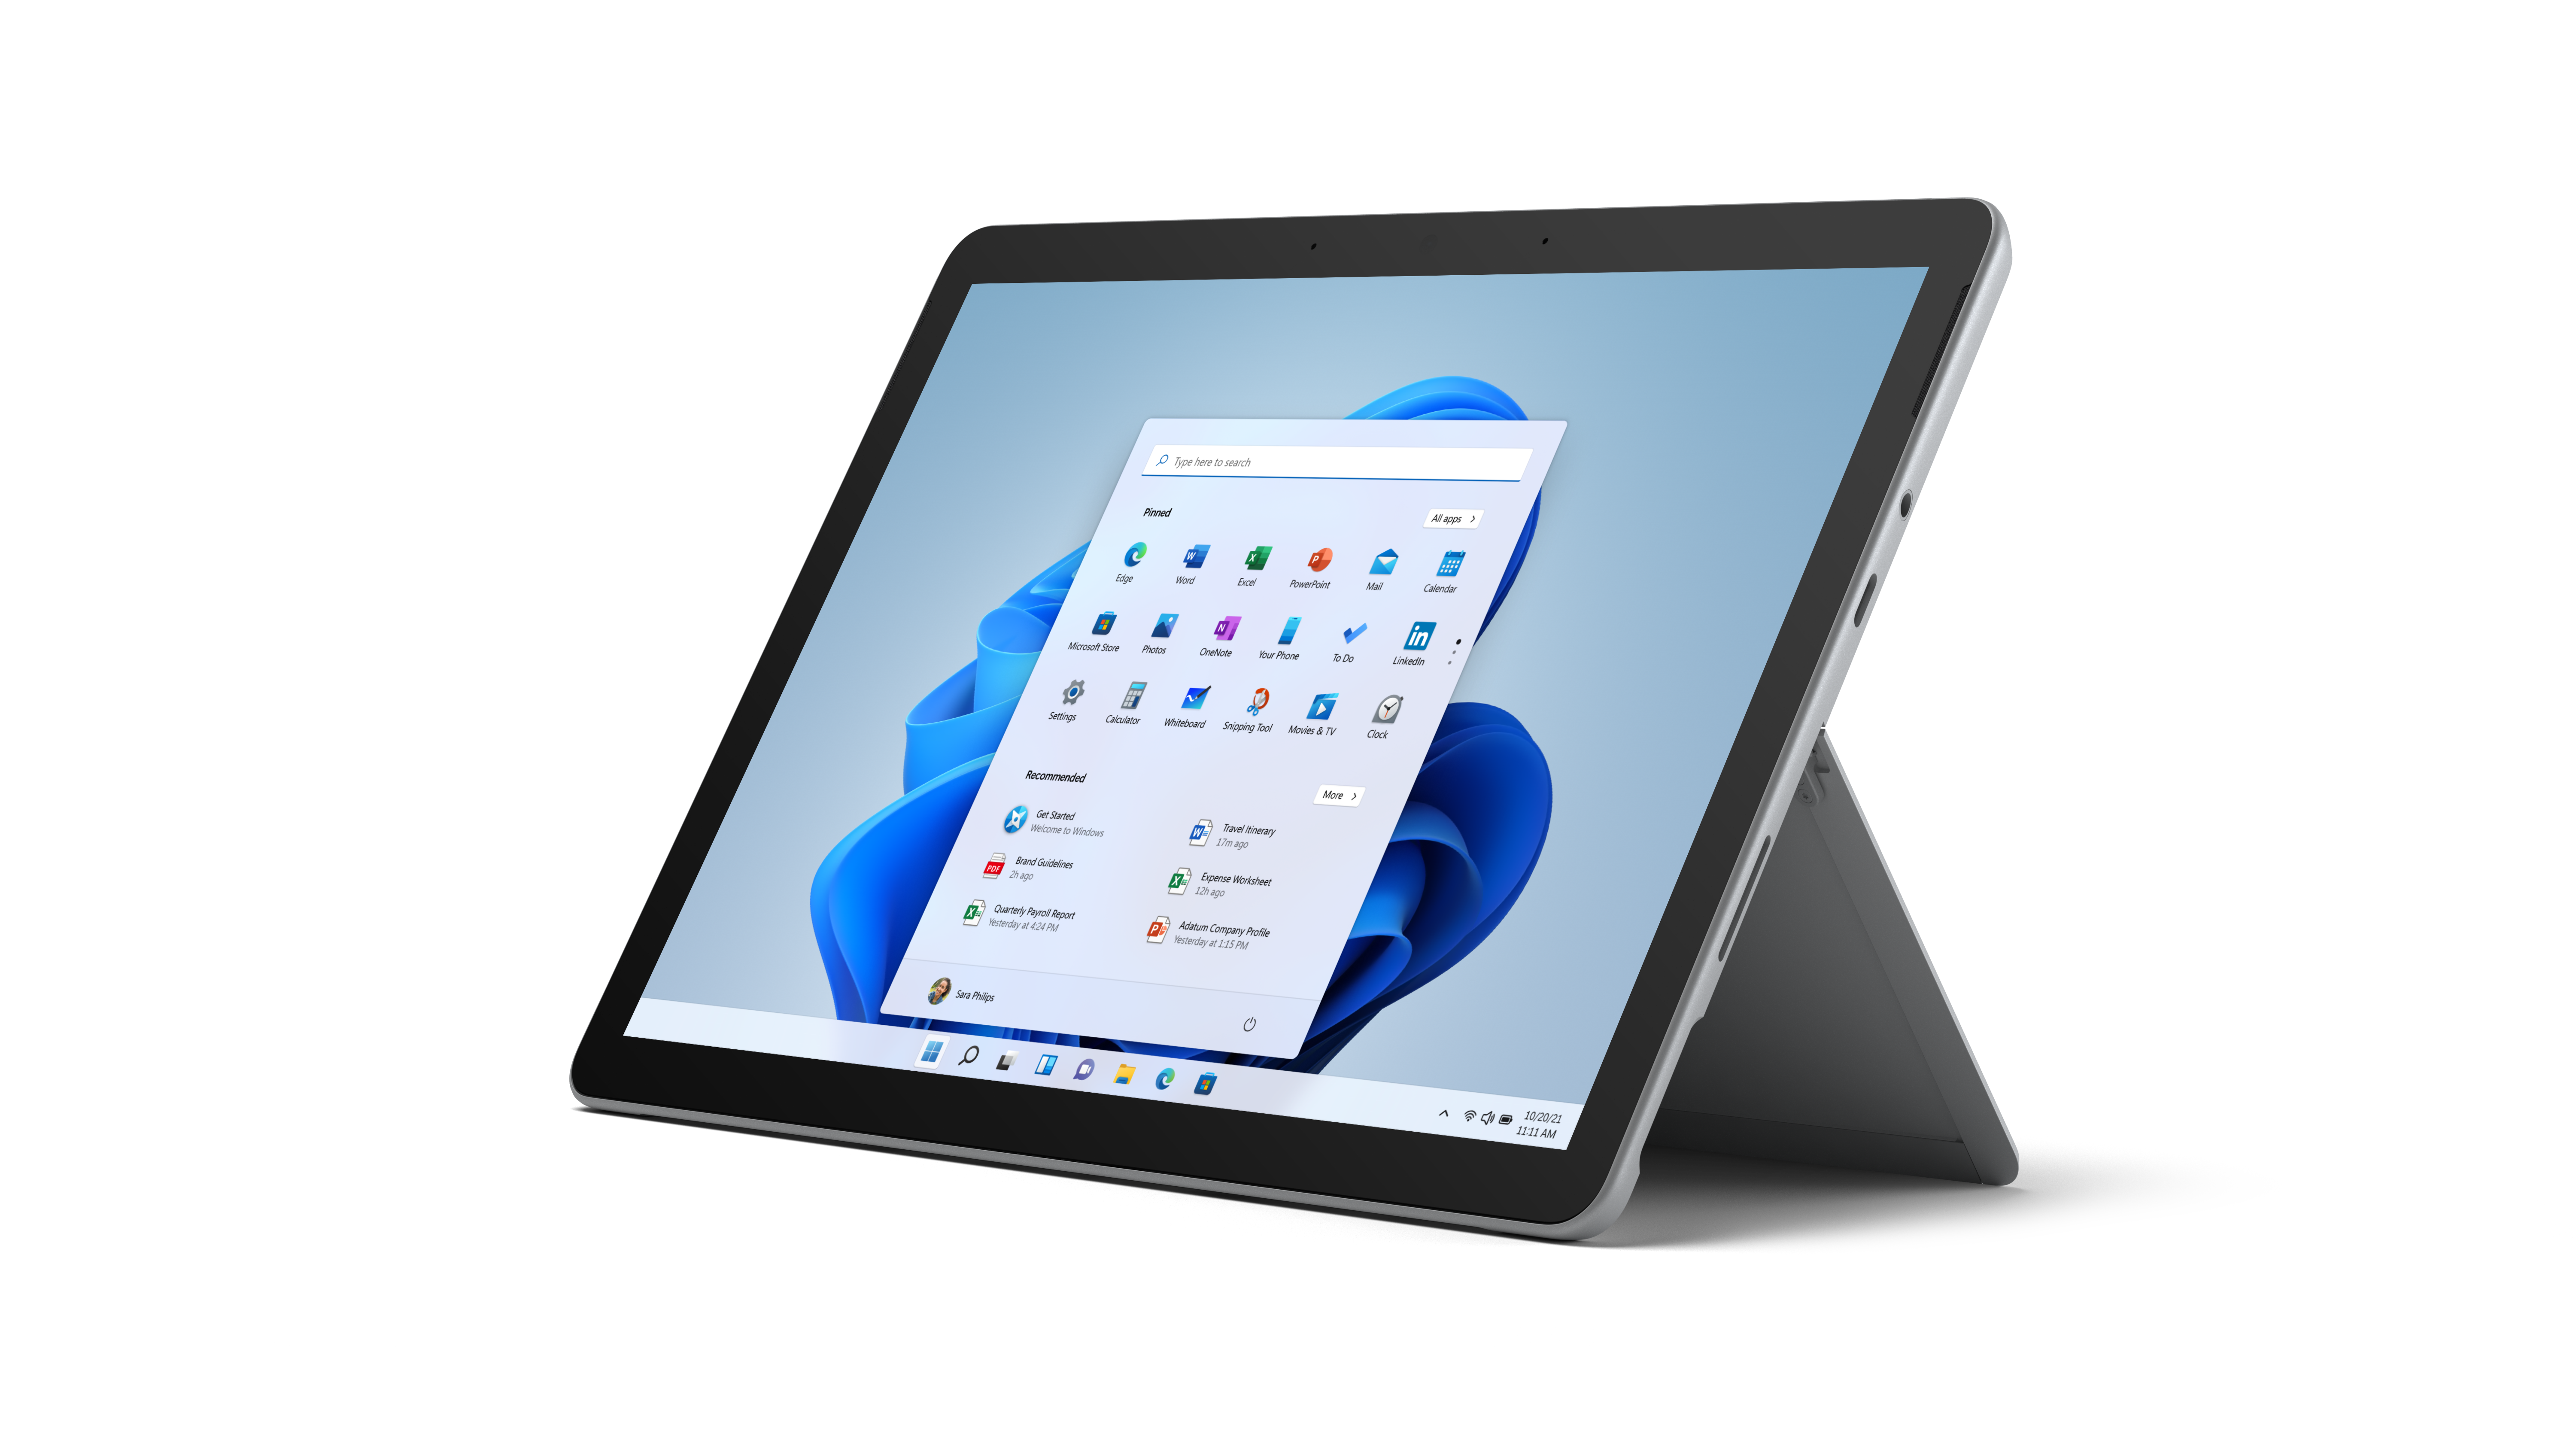 Rent Xiaomi Tablet, Pad 5 - WiFi - Android - 128GB from €12.90 per